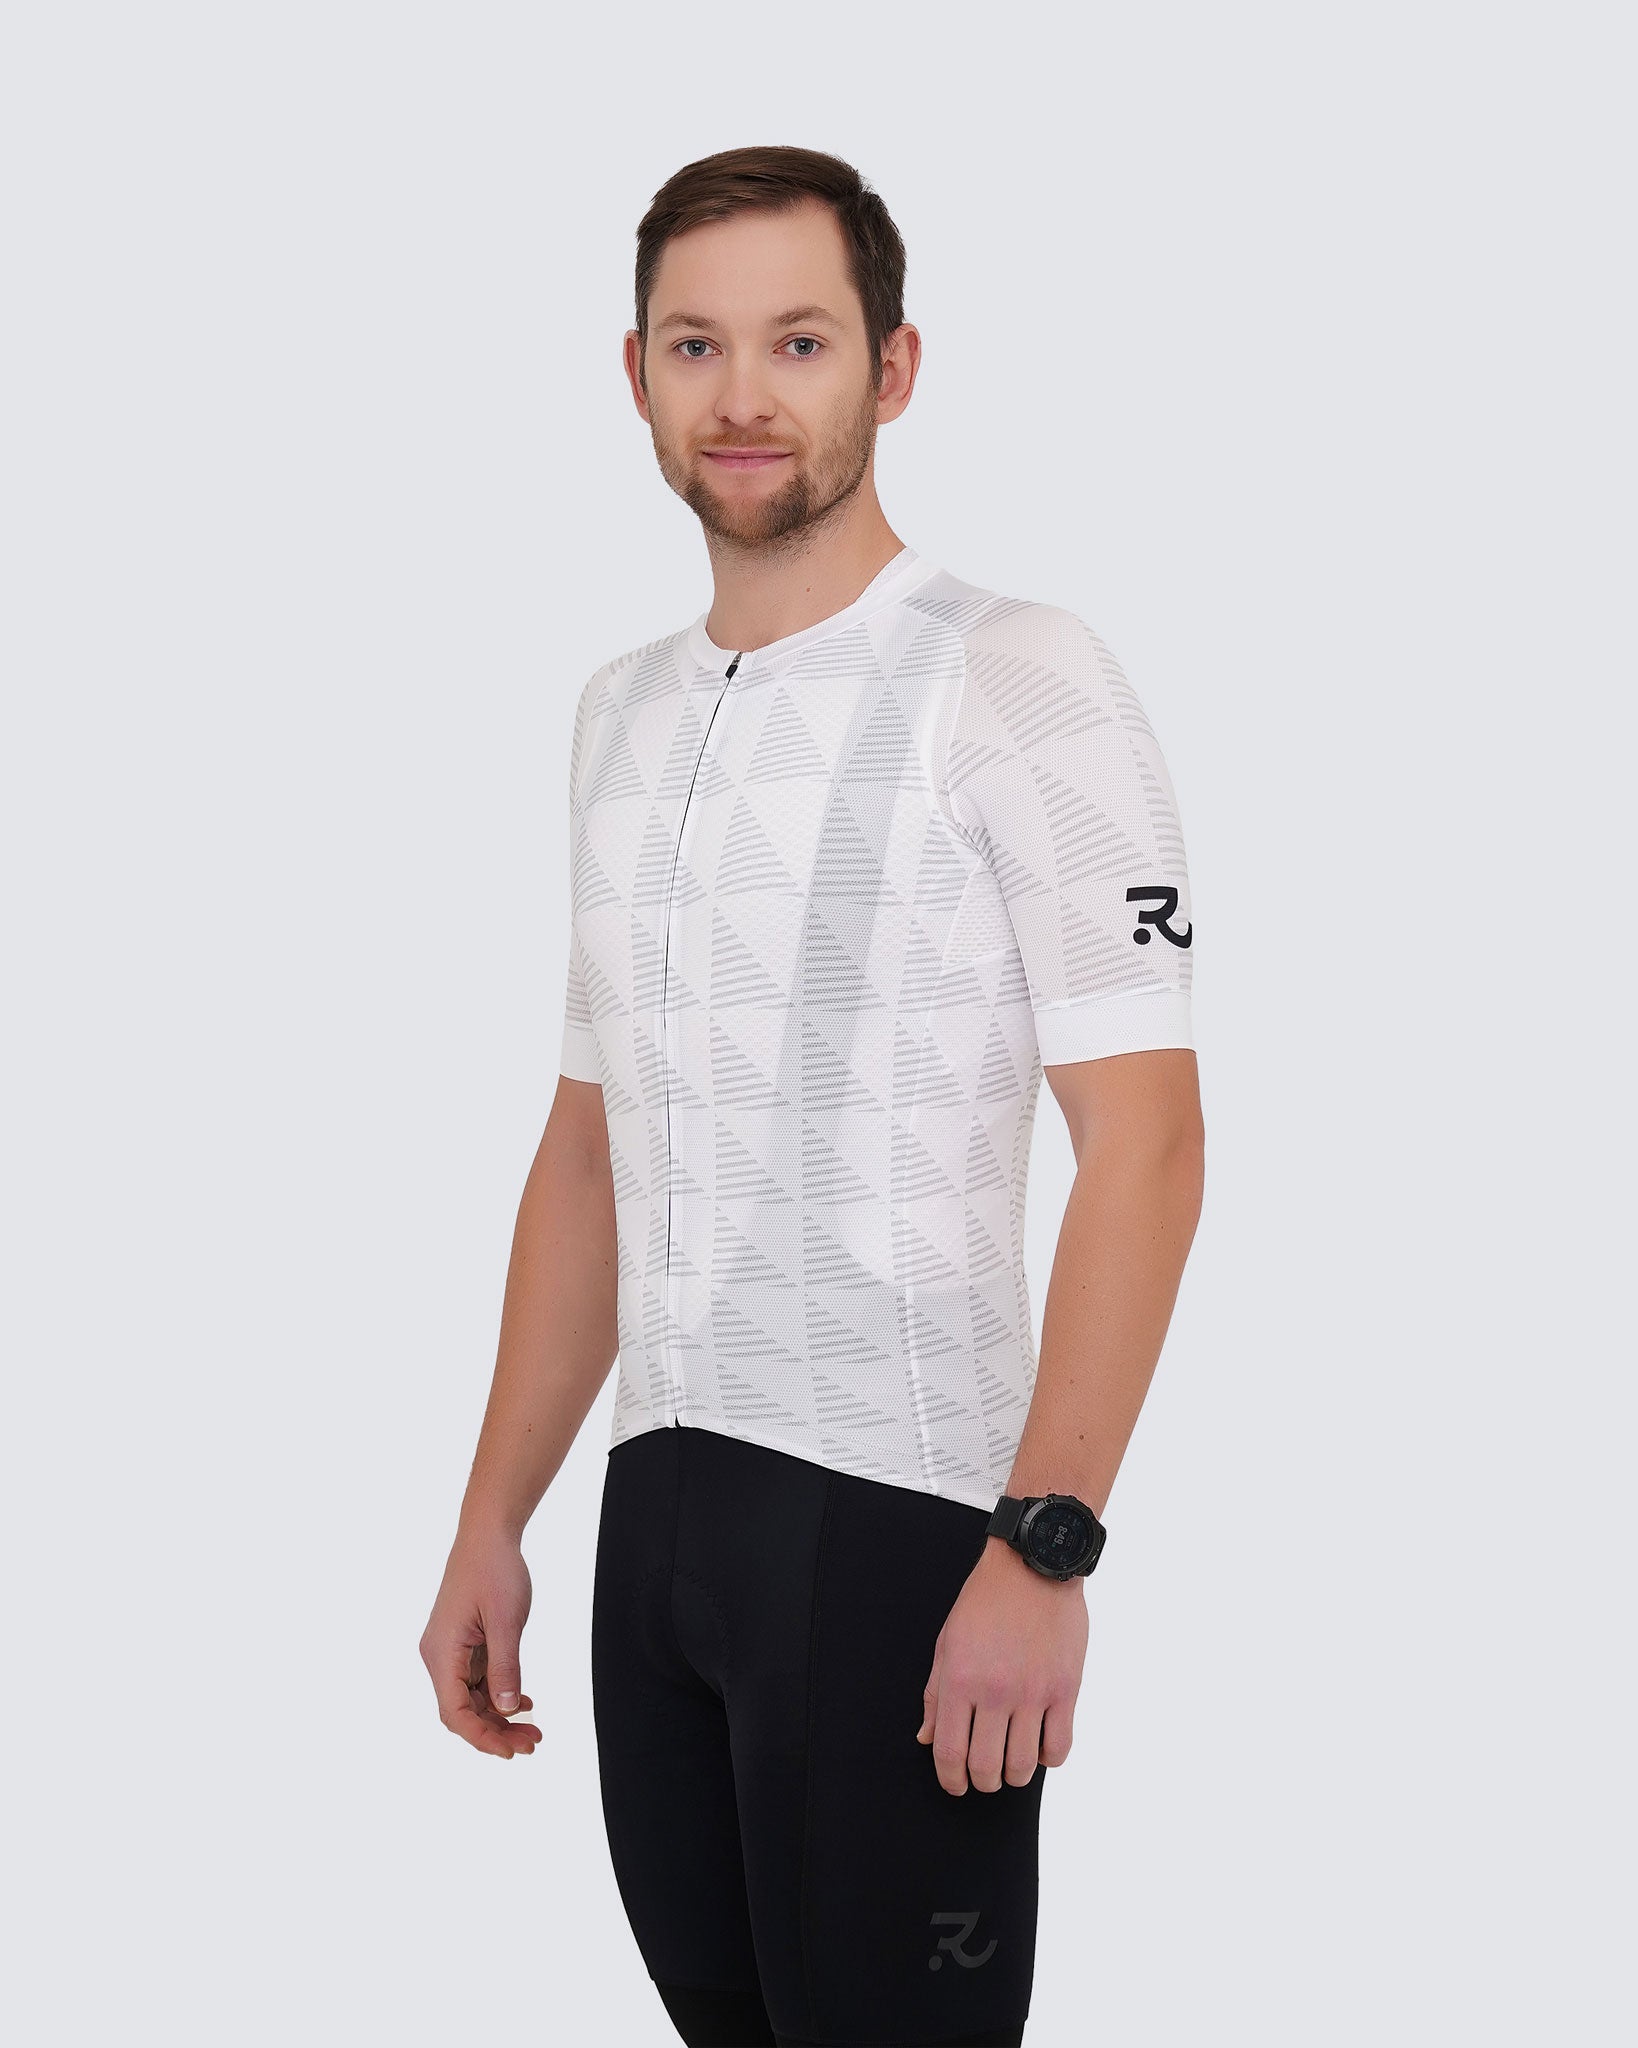 side view of white cycling jerset with black bibs